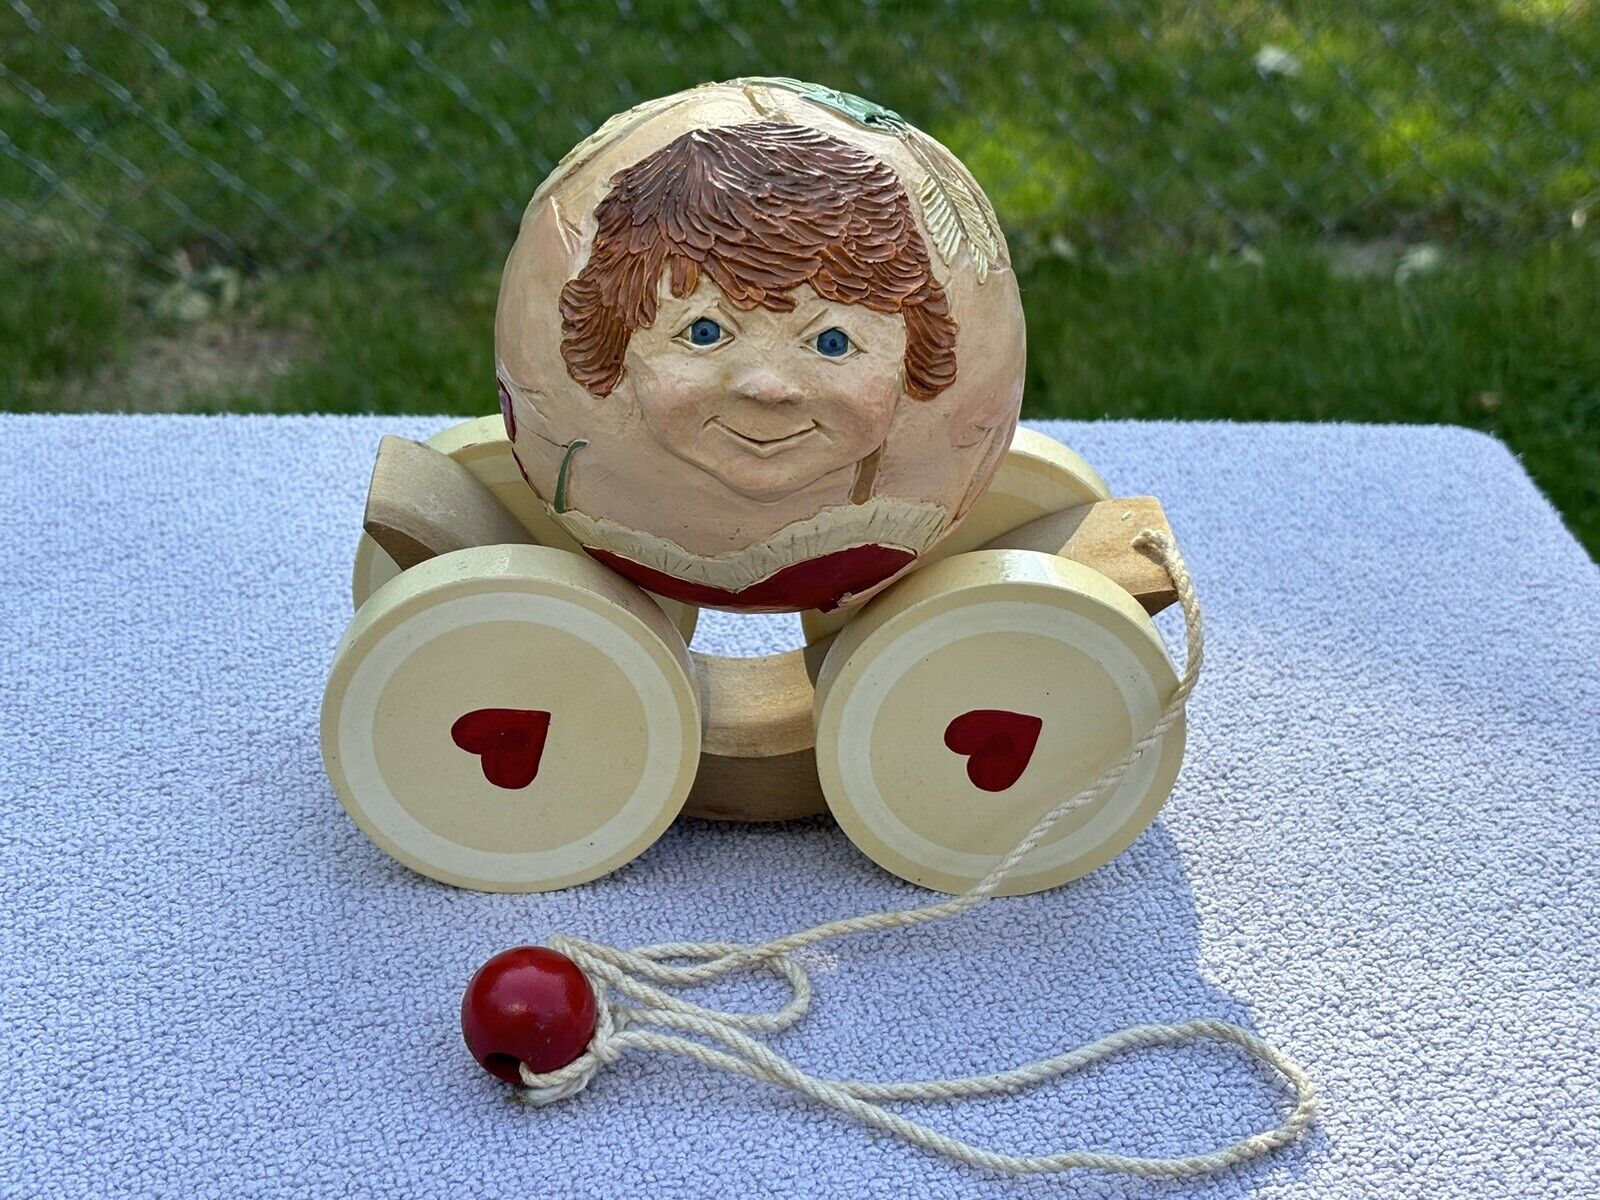 BRIERE Folk Art Pull Toy 1995 Cupid With Wings Ball & Hearts Cart /Cradle #69